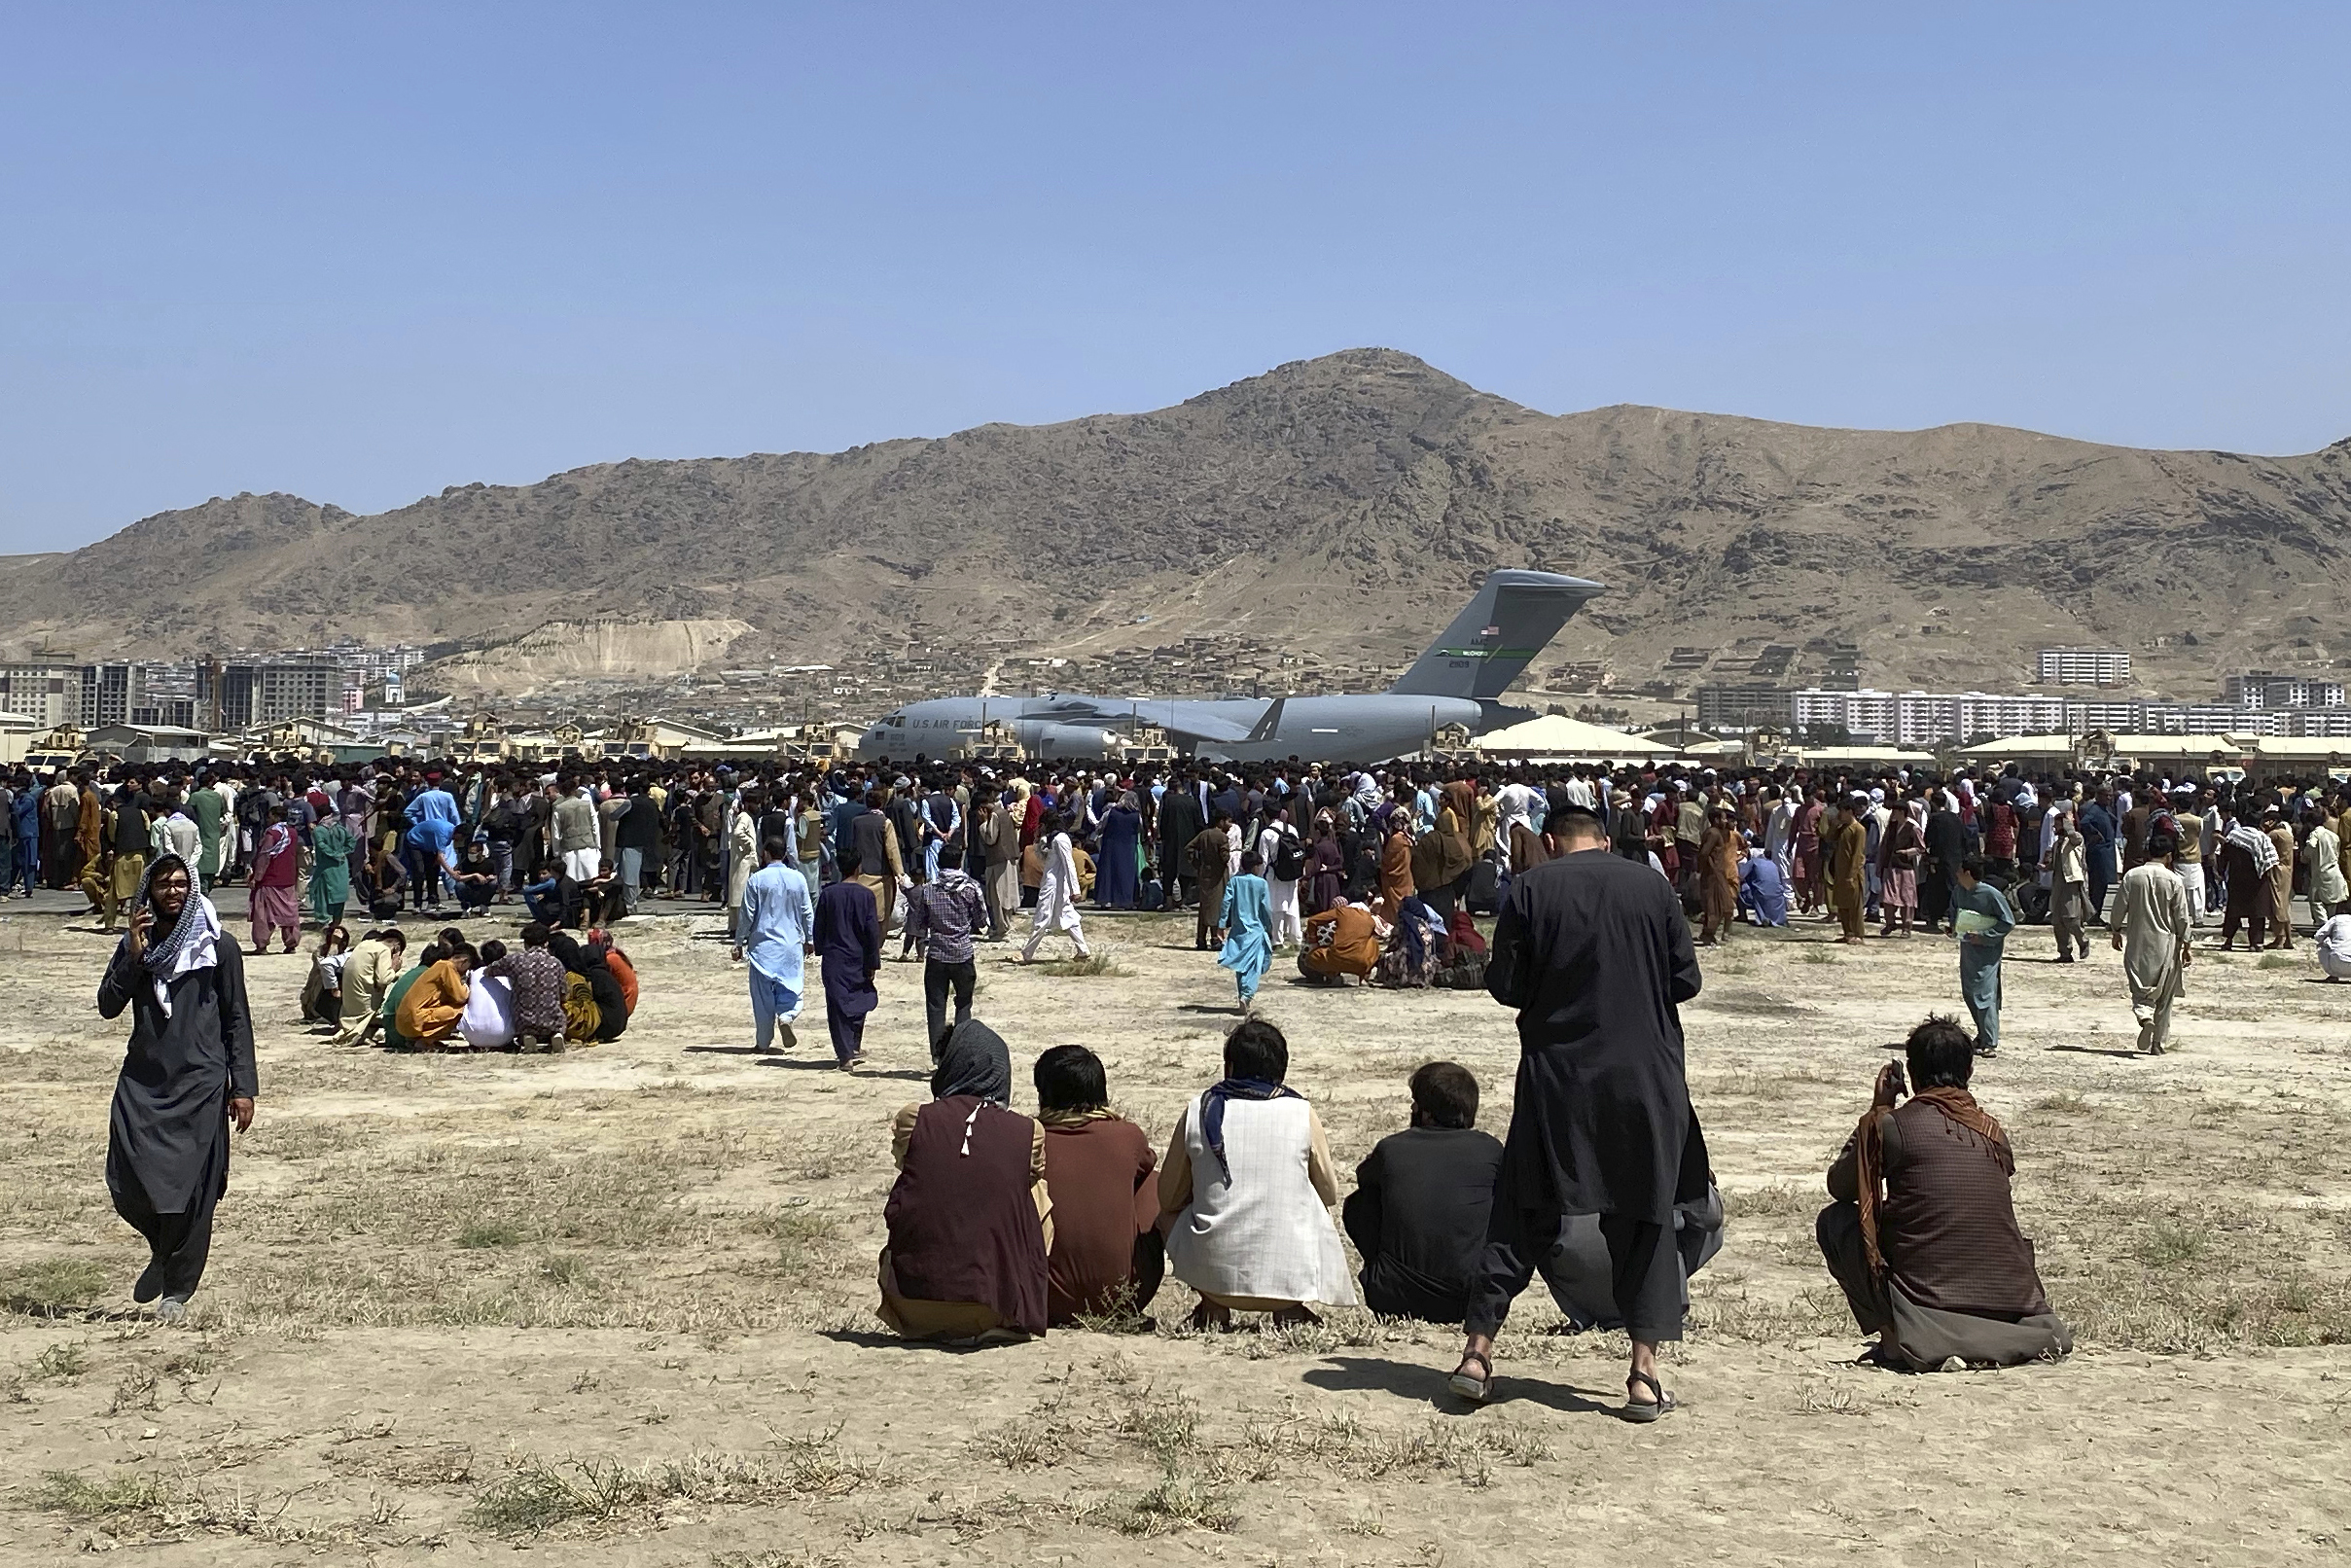 A rumor that killed Afghans in Kabul in a stampede or falling out of the plane. What's the story?